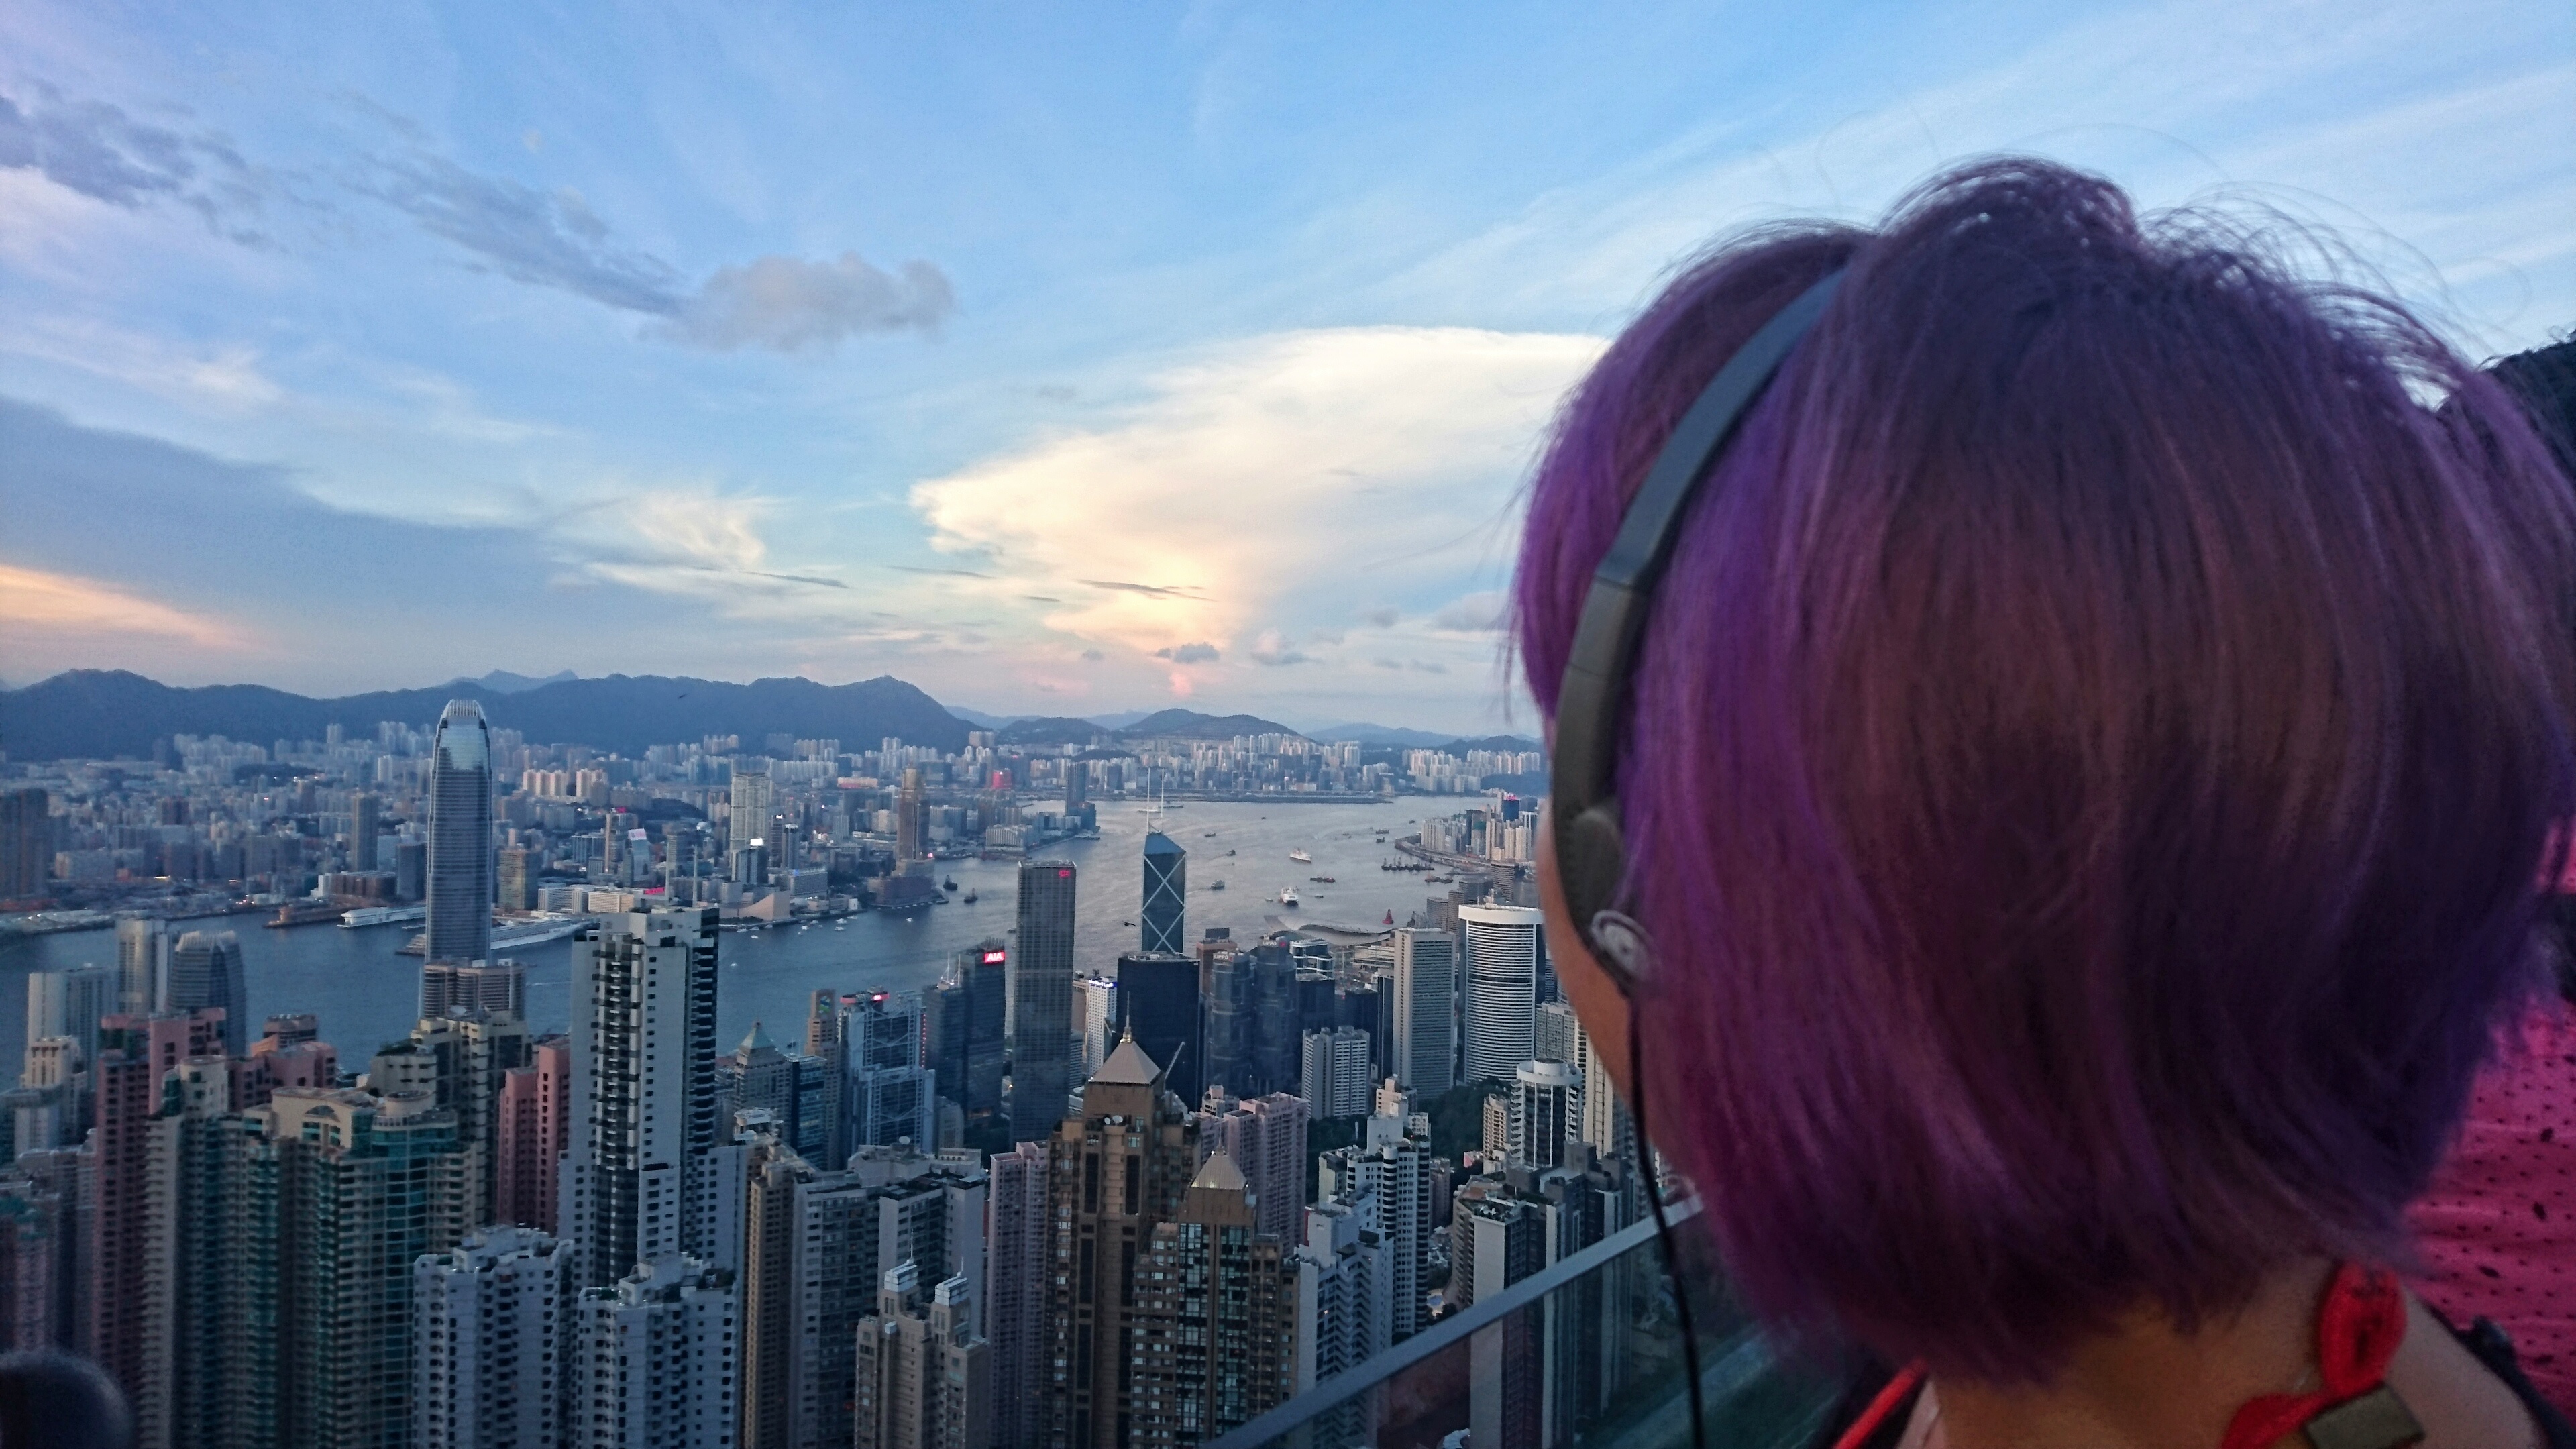 View of Victoria Harbour from The Peak, Hong Kong